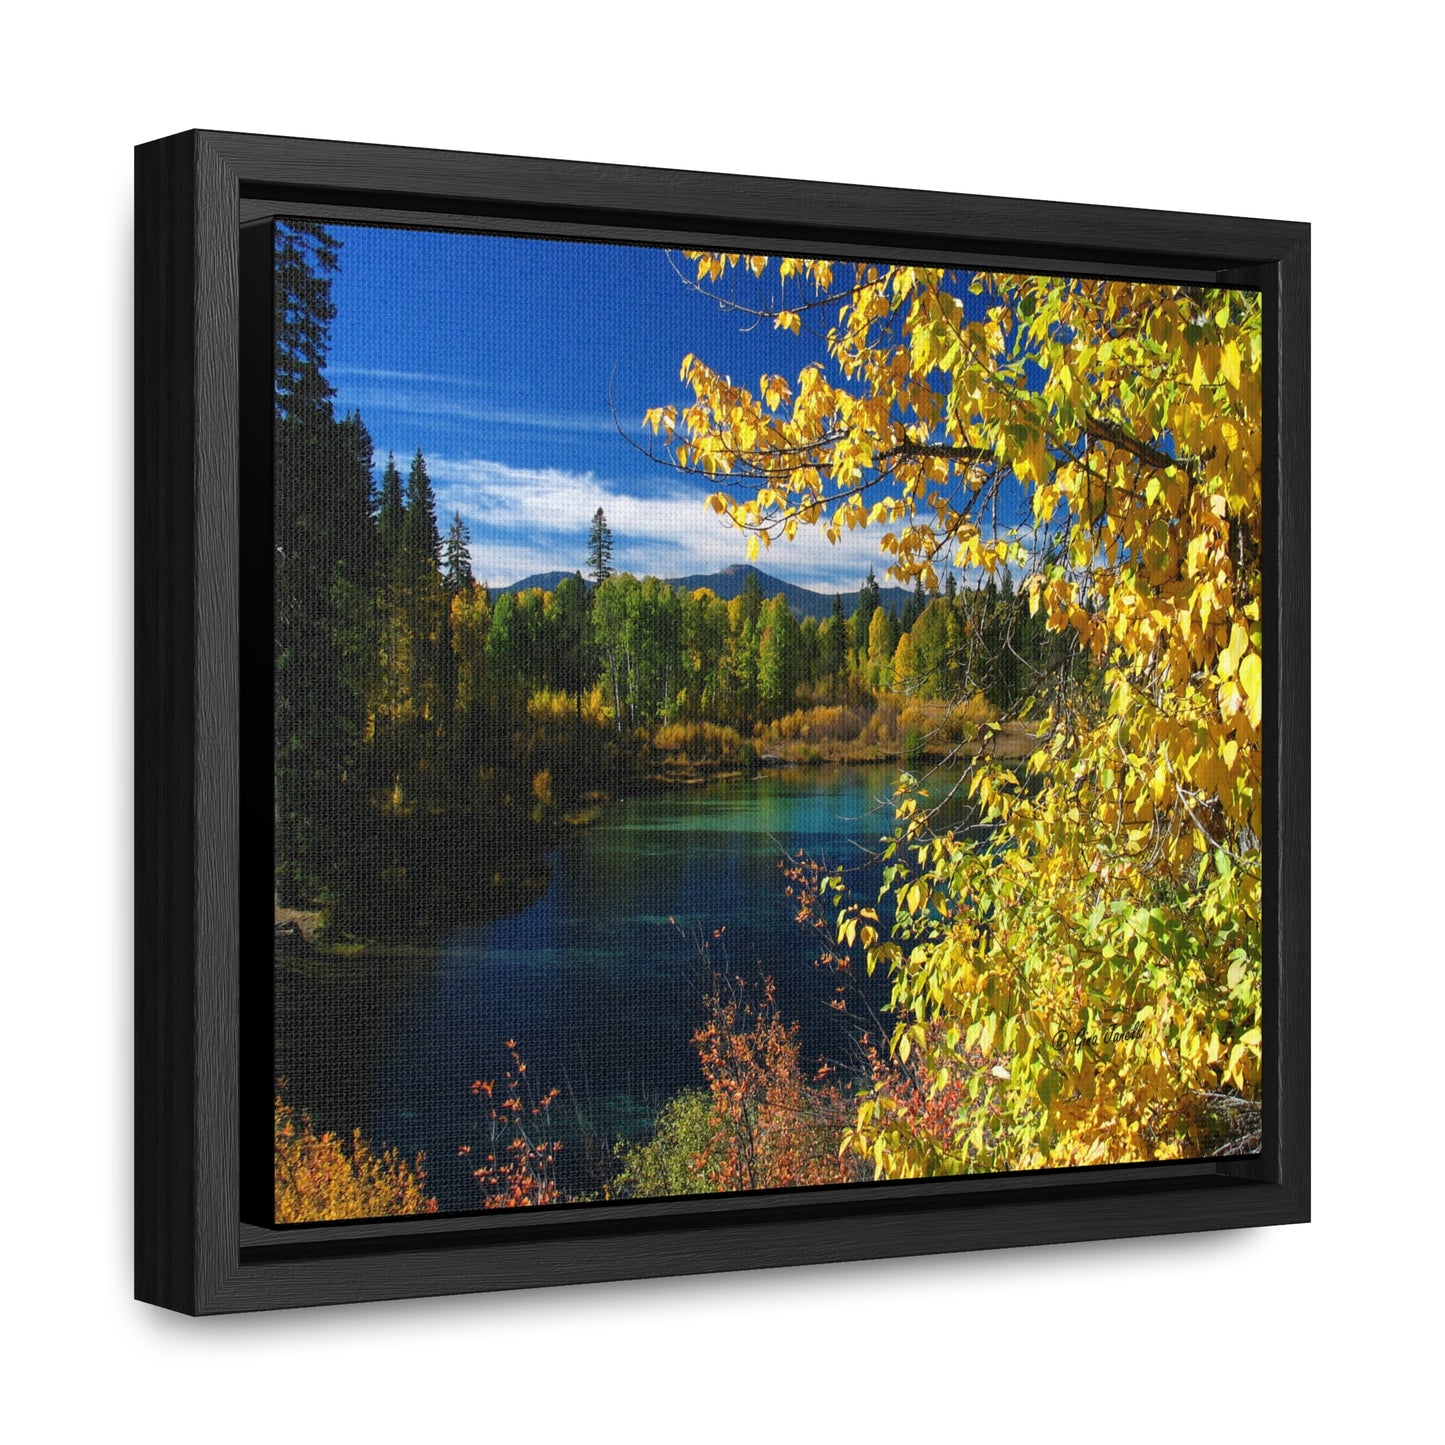 Wood River, Kimball State Park, Ft. Klamath Or.    Gallery Canvas Wraps, Horizontal Frame